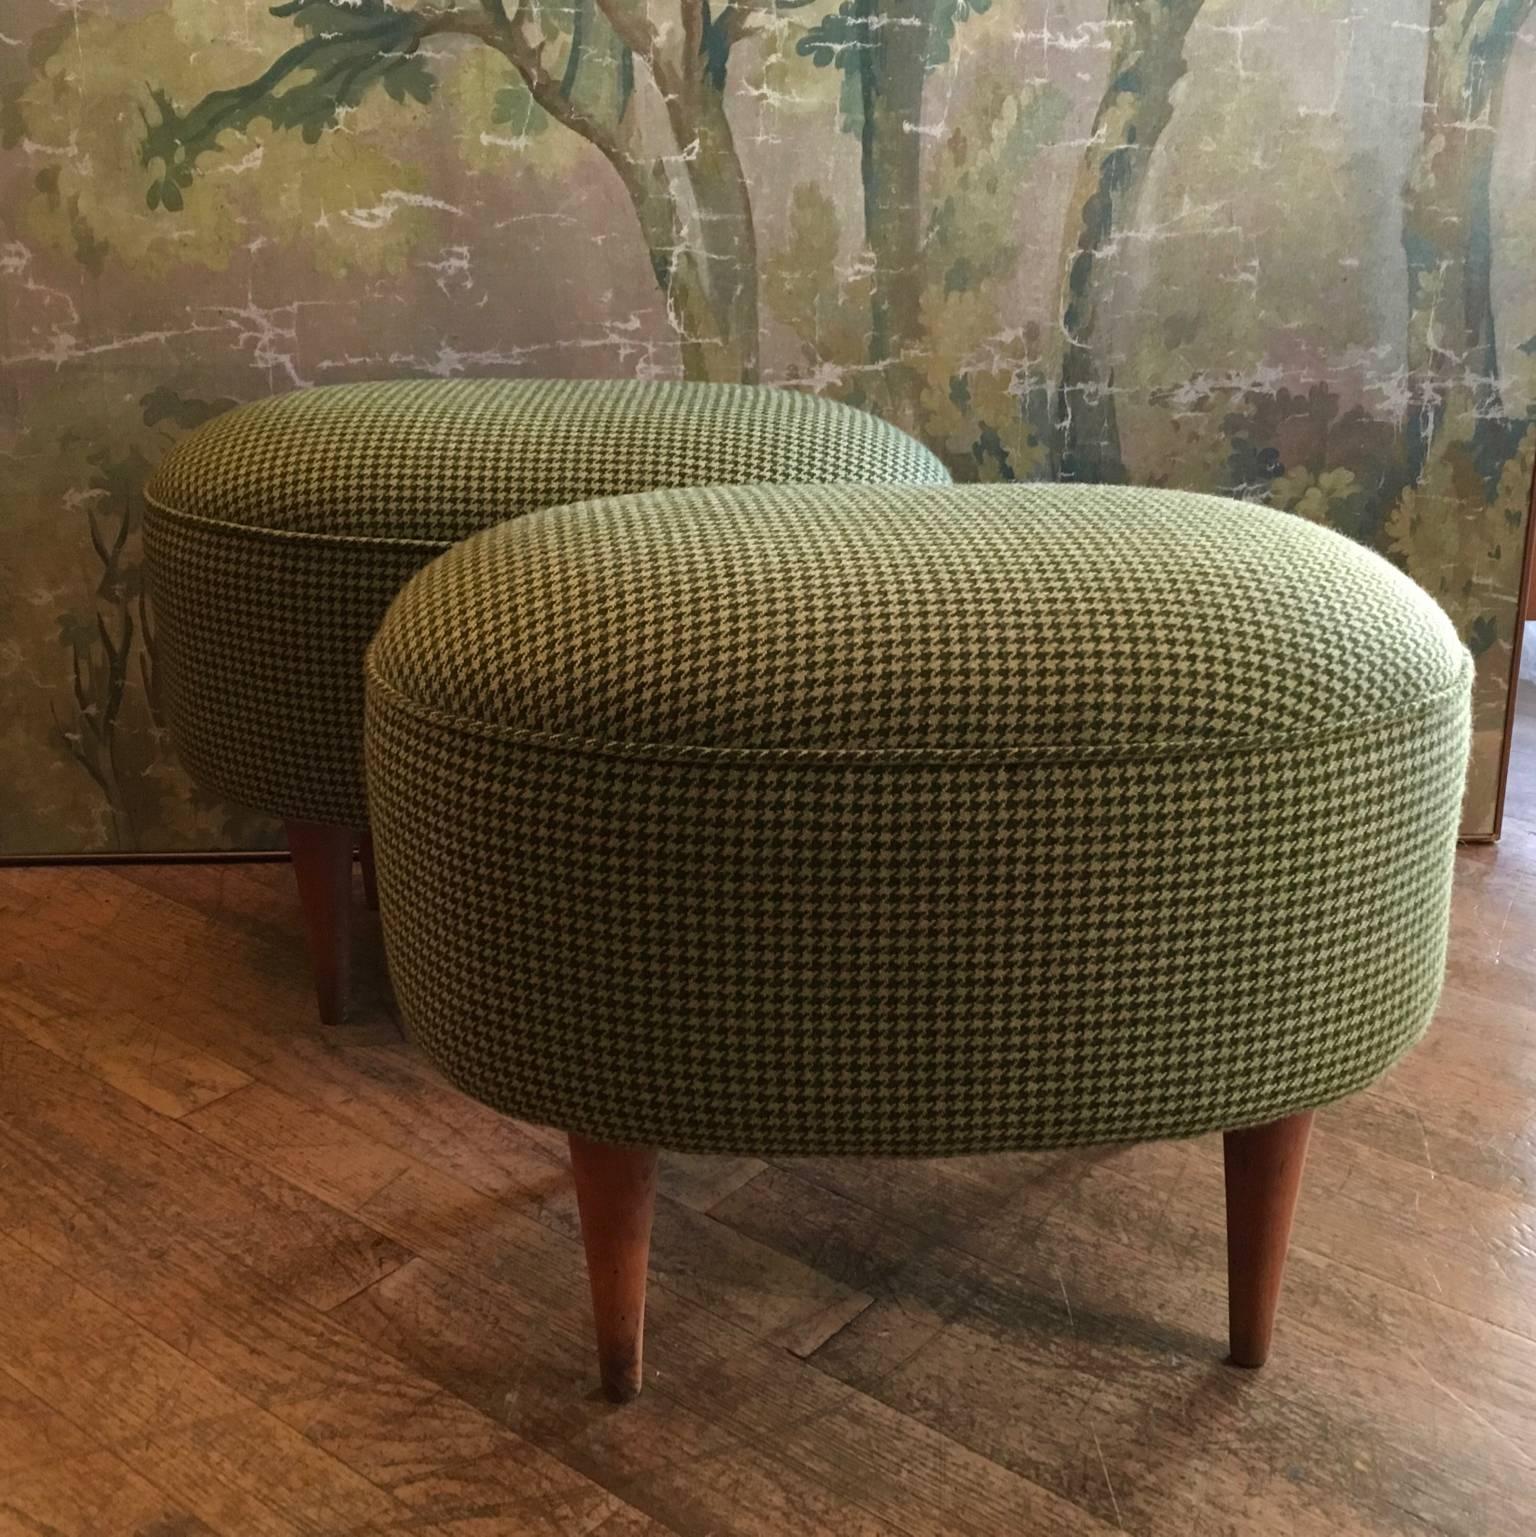 Two oval 1950s Italian stools reupholstered in a Scottish houndstooth (pied de poule) woolen fabric, wooden feet.